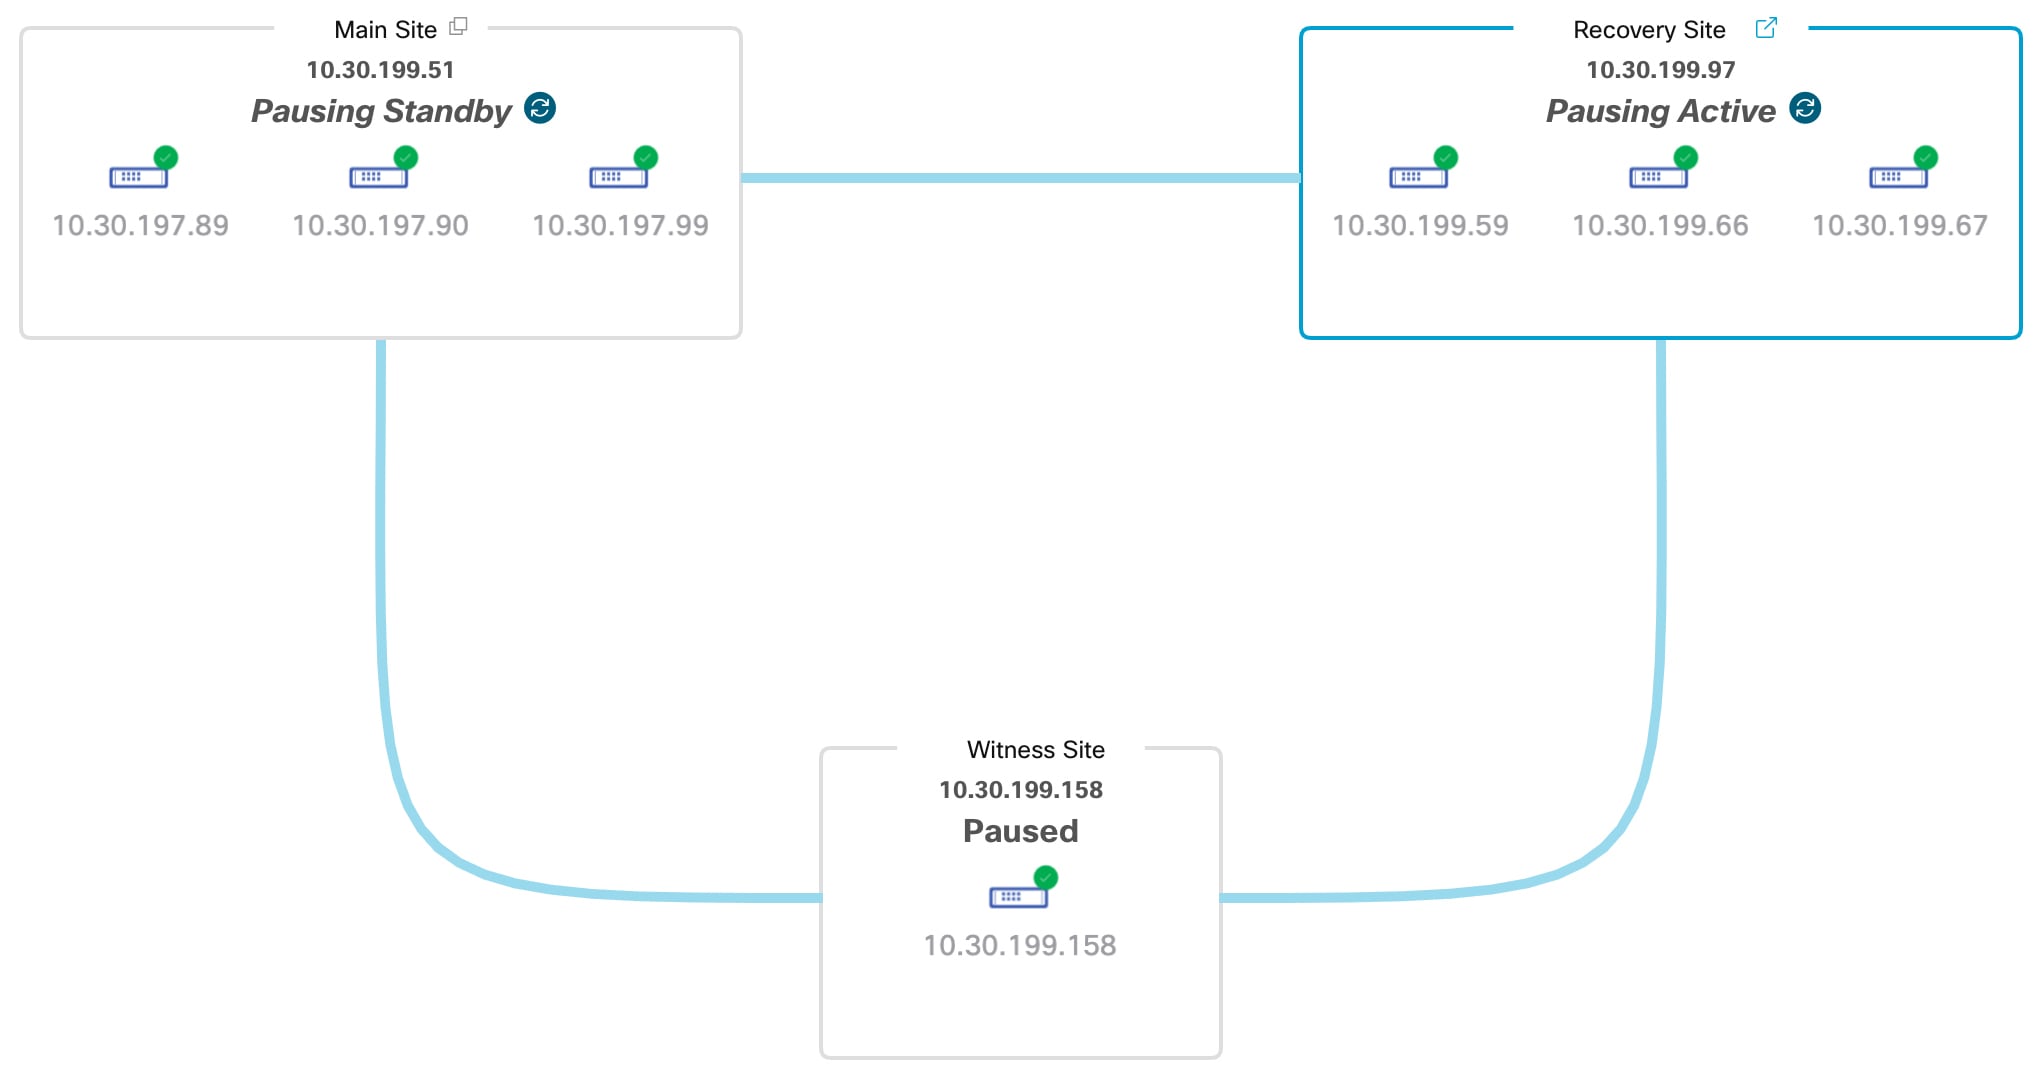 The Monitoring tab of the Cisco DNA Center Disaster Recovery window displays the system topology. The main and recovery sites are in Pausing state.